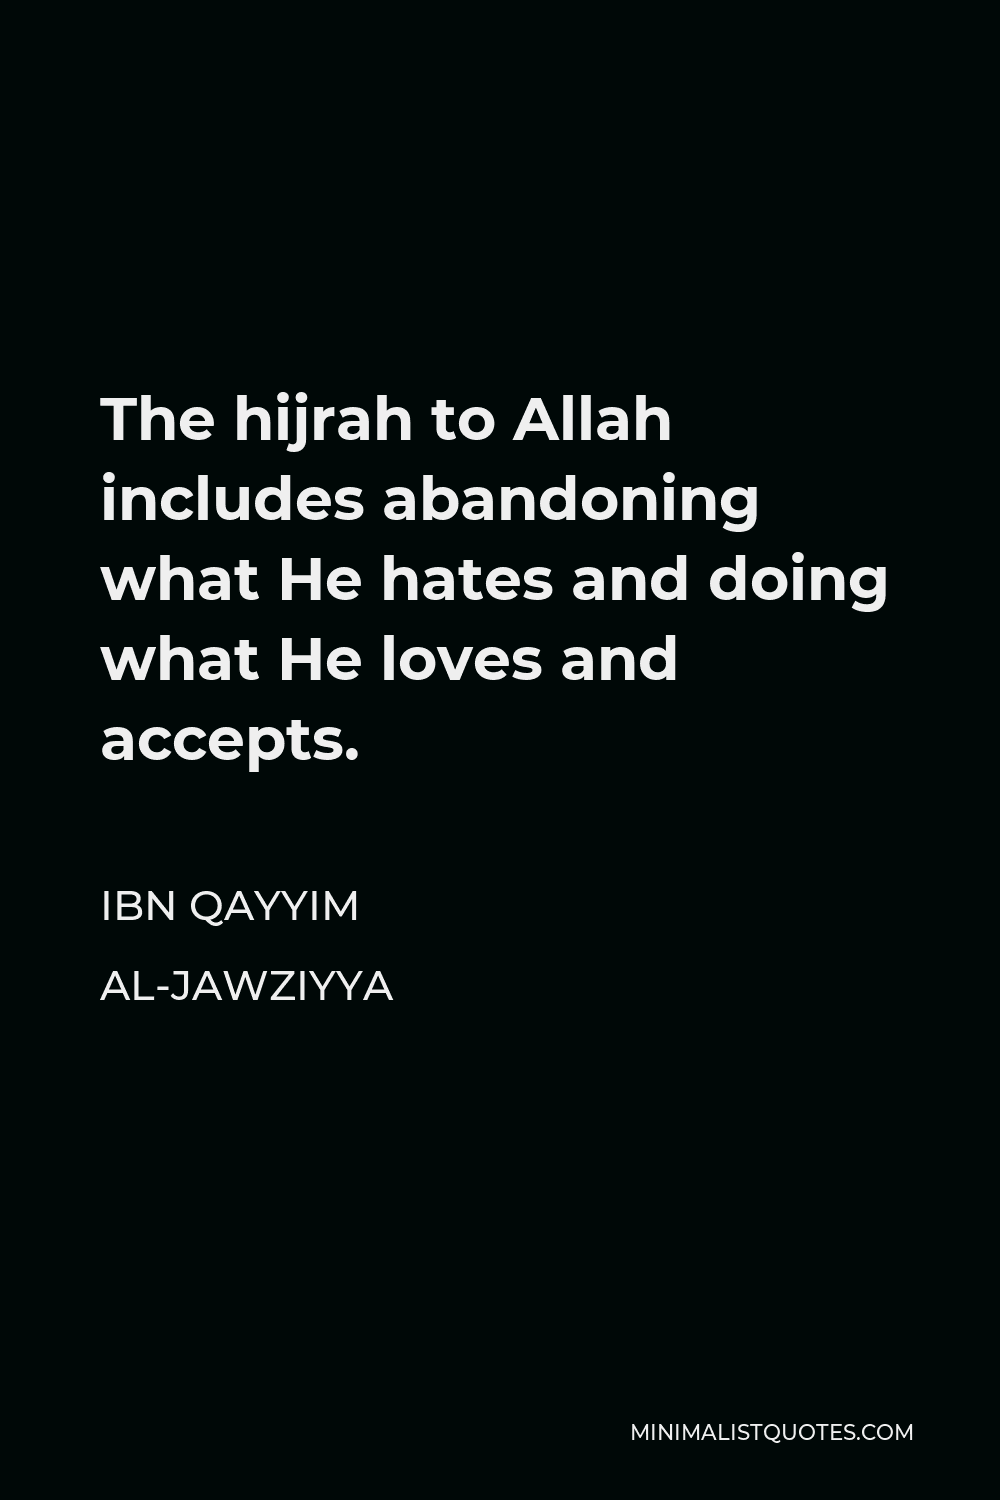 Ibn Qayyim Al-Jawziyya Quote - The hijrah to Allah includes abandoning what He hates and doing what He loves and accepts.